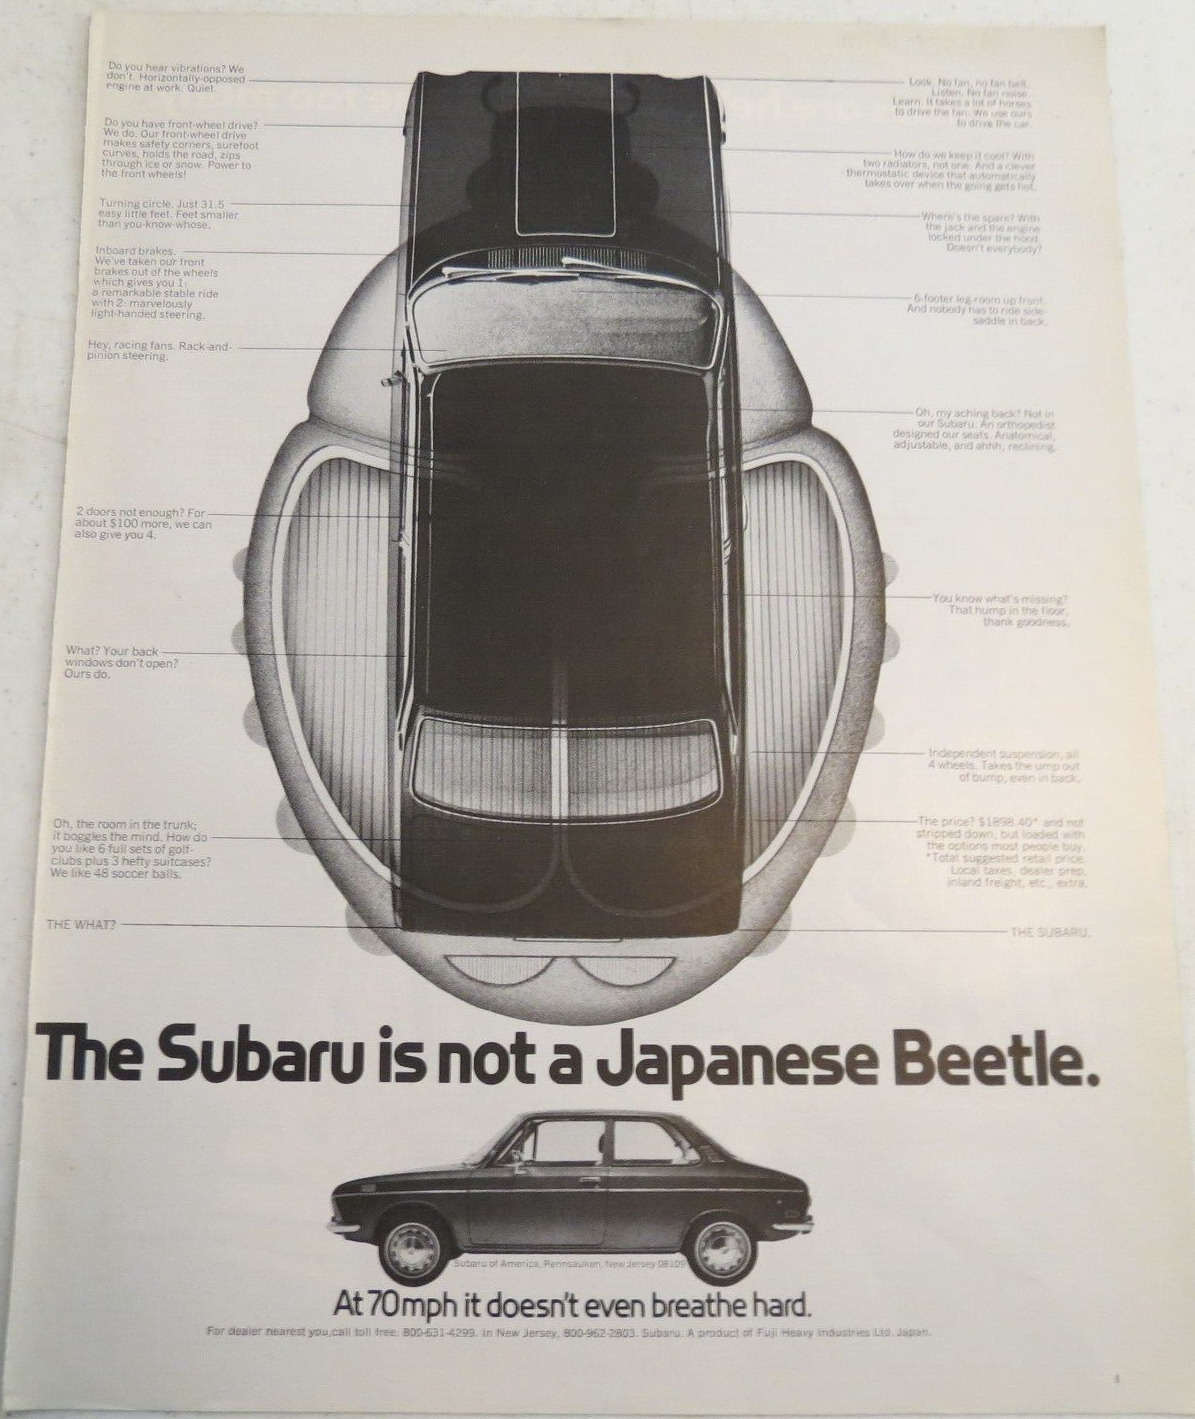 1971 Print Ad Subaru is not a Japanese Beetle at 70mph it doesn't even breathe